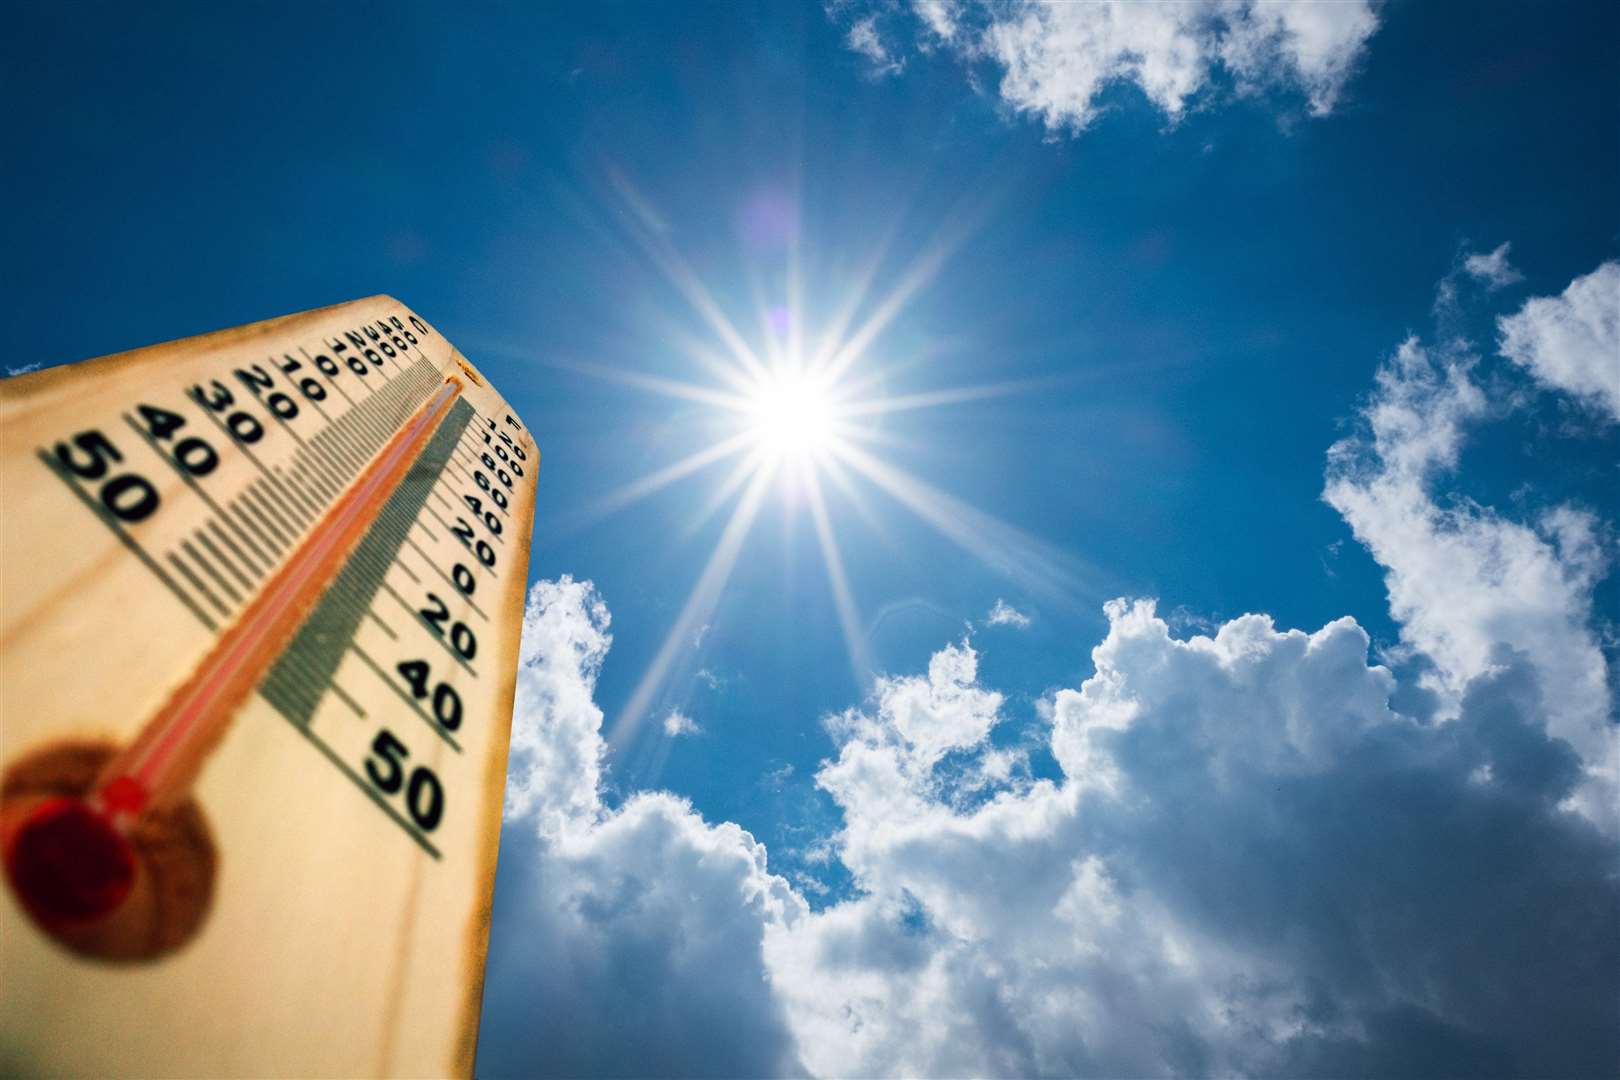 The highest temperature recorded was in Cambridge in July 2019